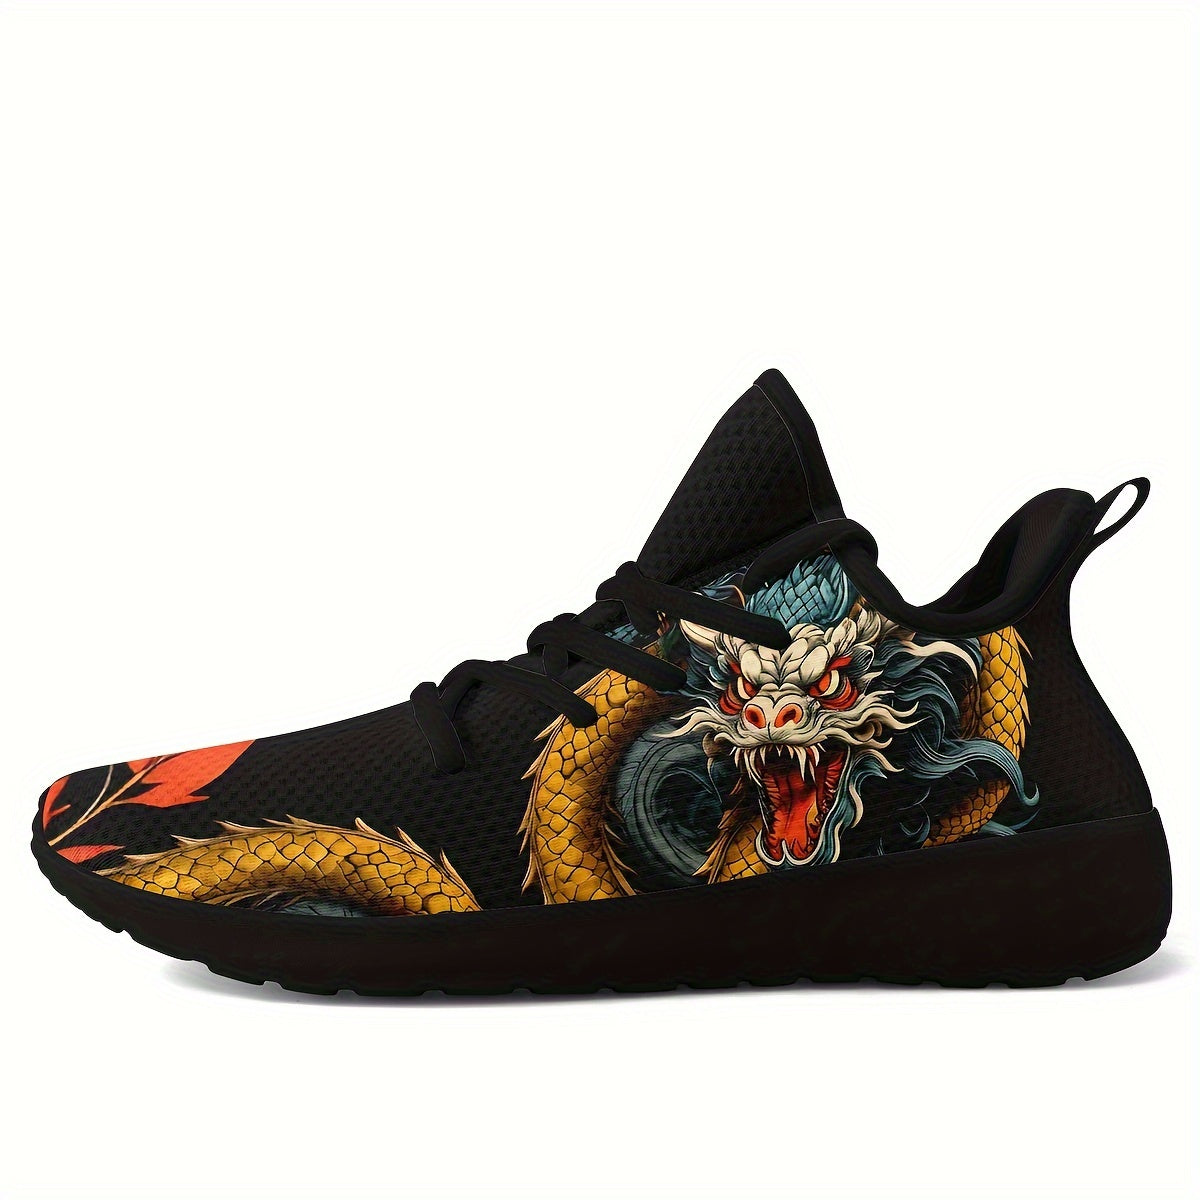 Men's Chinese Dragon Graphic Design Knit Breathable Running Shoes, Comfy Soft Sole Shock Absorption Lace Up Sneakers